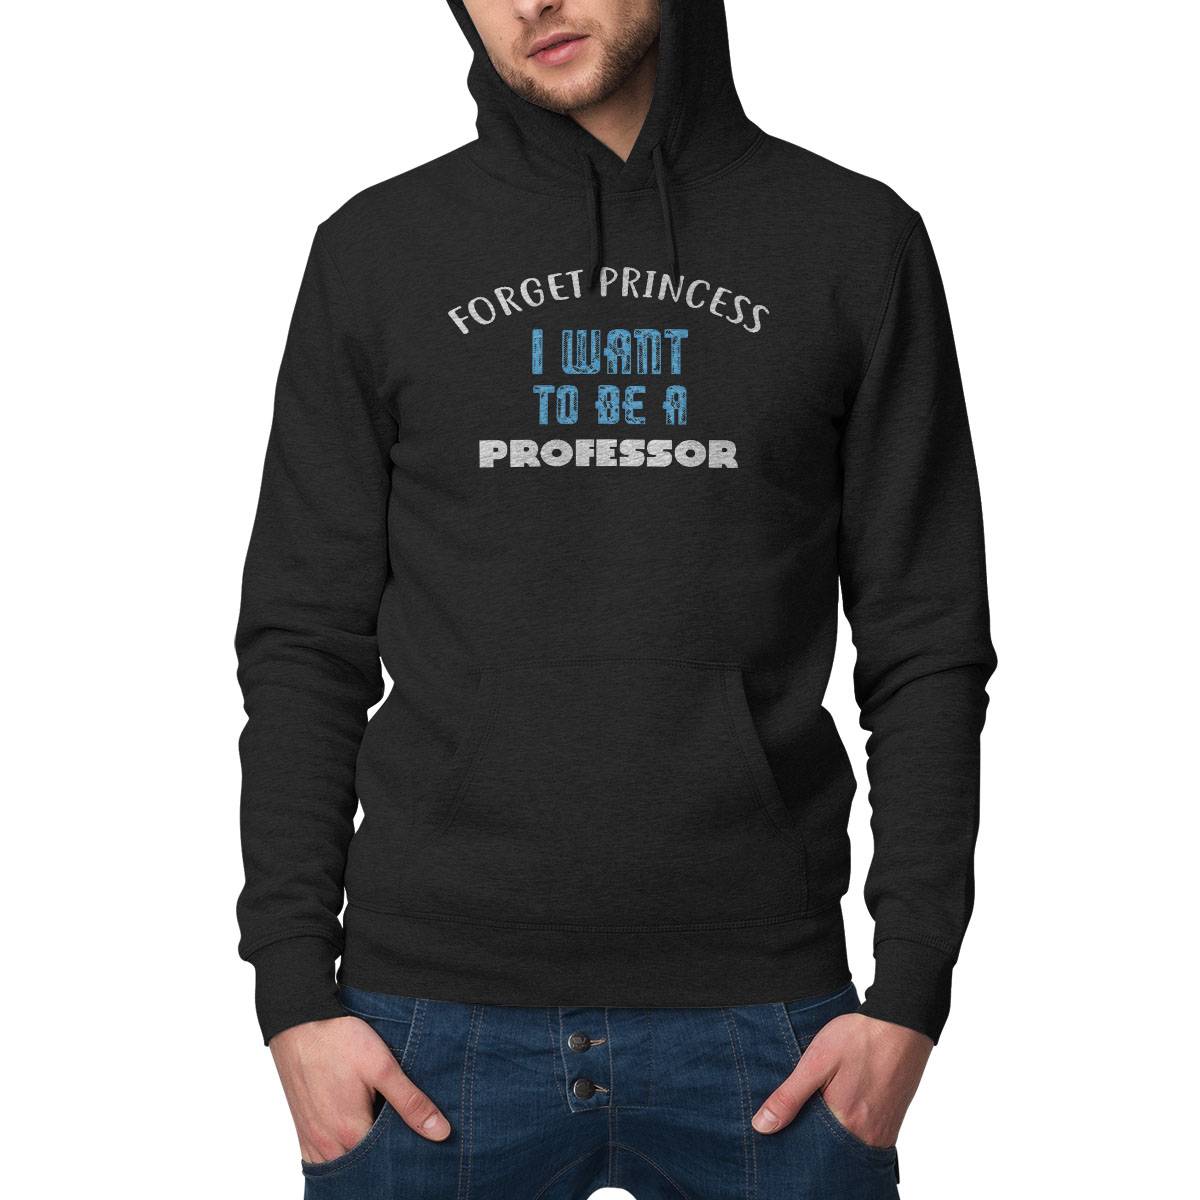 Forget Princess I Want To Be A Professor T-Shirt